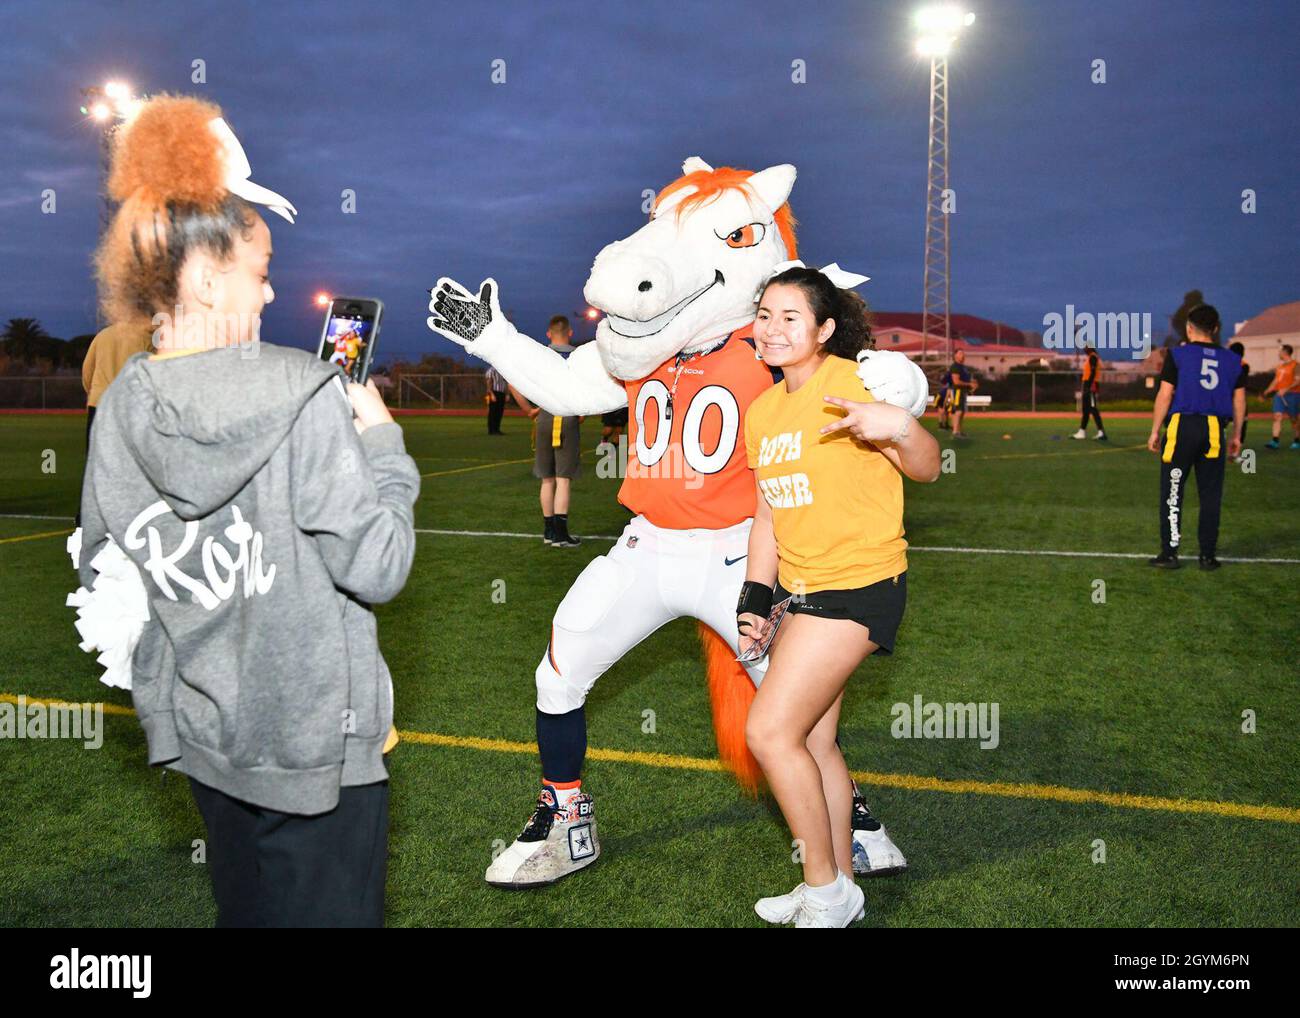 200128-N-KH151-0283 NAVAL STATION ROTA, Spain (Jan. 28, 2020) The Denver Broncos mascot, Miles, poses for a photo with a Rota David Glasgow Farragut (DGF) middle/high school cheerleader during an exhibition flag football game between Sailors and Marines at Naval Station (NAVSTA) Rota. Naval Station Rota sustains the fleet, enables the fighter and supports the family by conducting air operations, port operations, ensuring security and safety, assuring quality of life and providing the core services of power, water, fuel and information technology. (U.S. Navy photo by Mass Communication Speciali Stock Photo